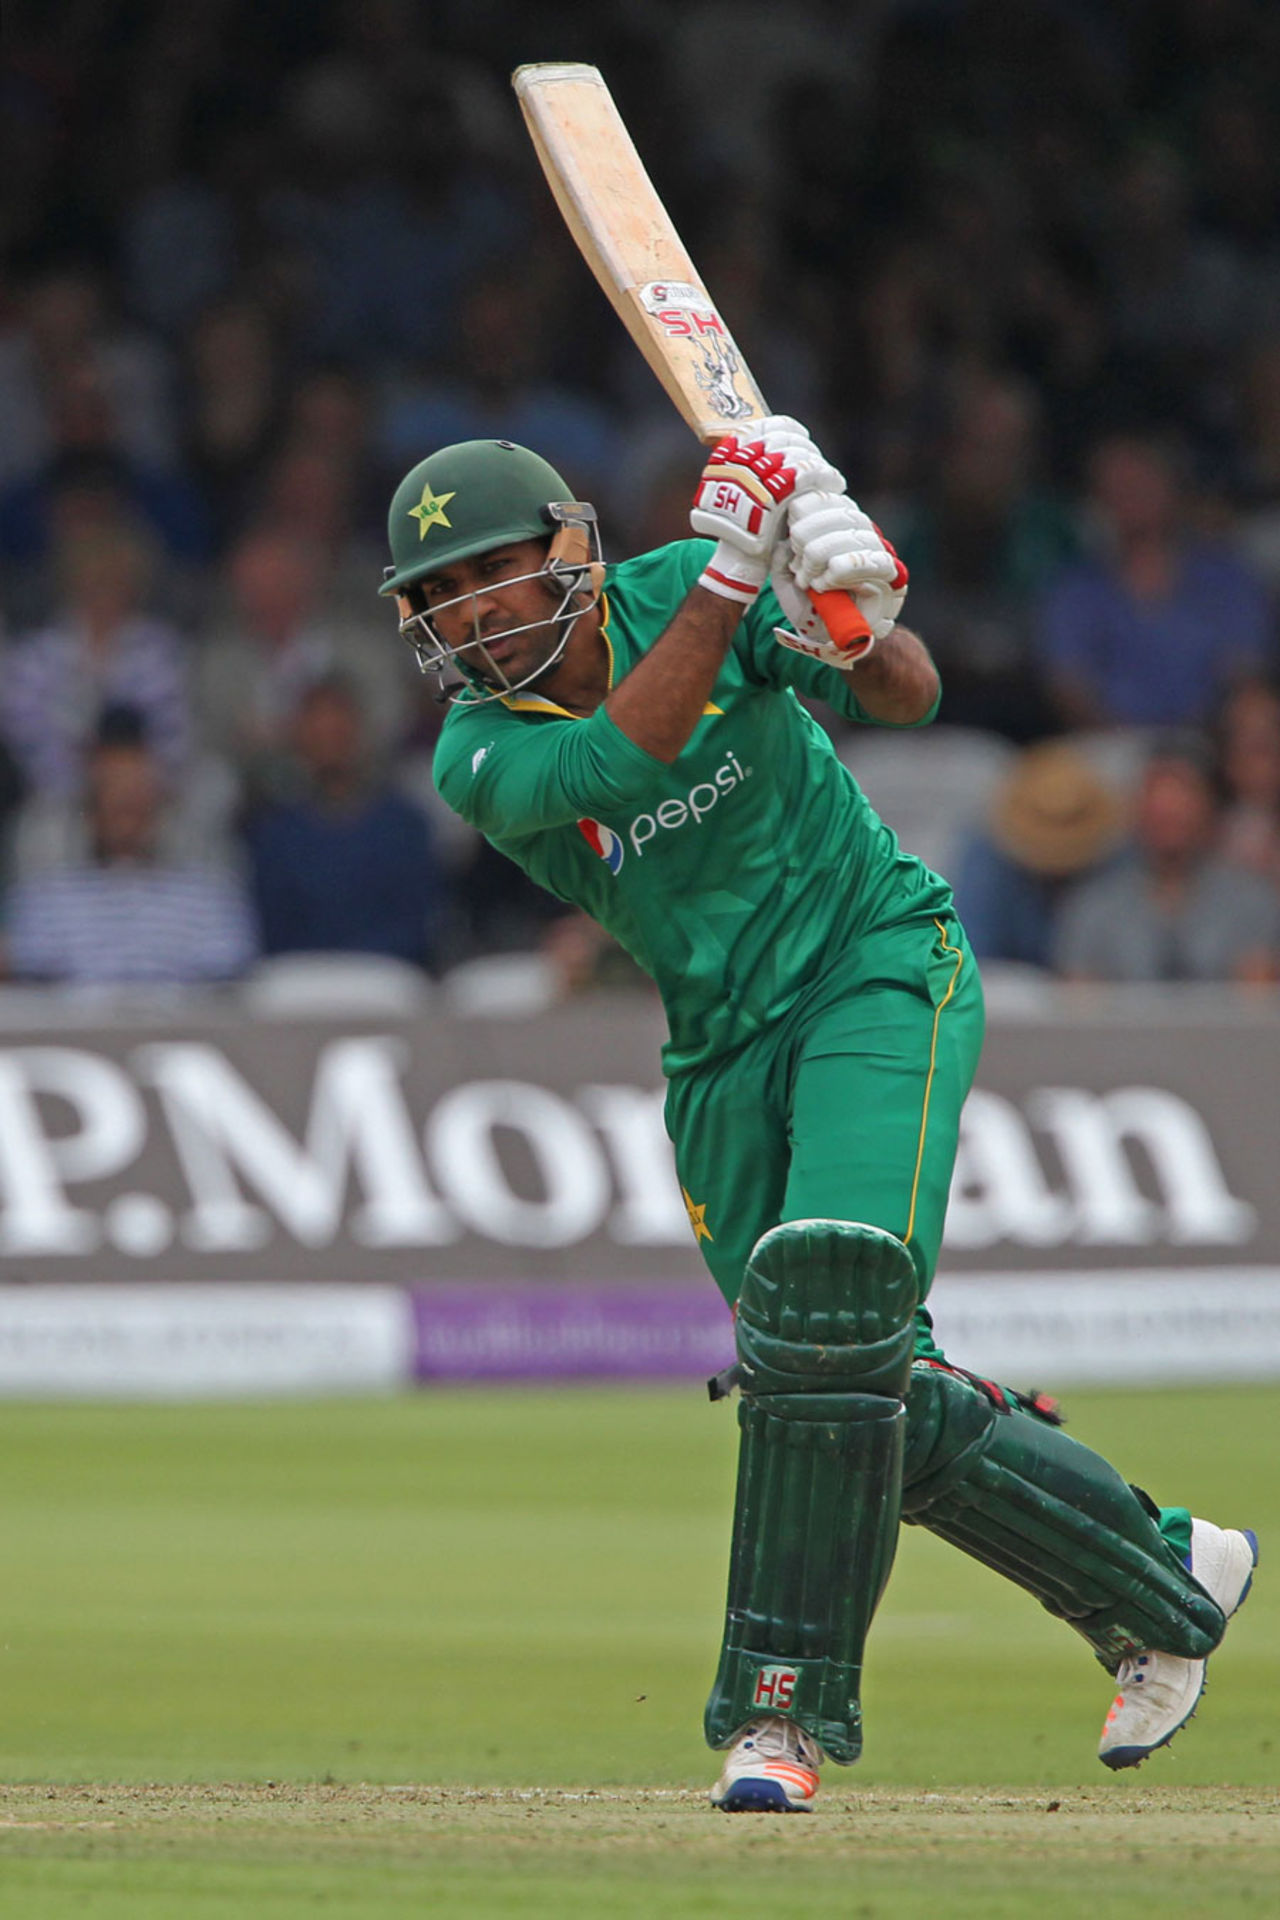 Sarfraz Ahmed helped to rescue Pakistan from a scoreline of 2 for 3, England v Pakistan, 2nd ODI, Lord's, August 27, 2016